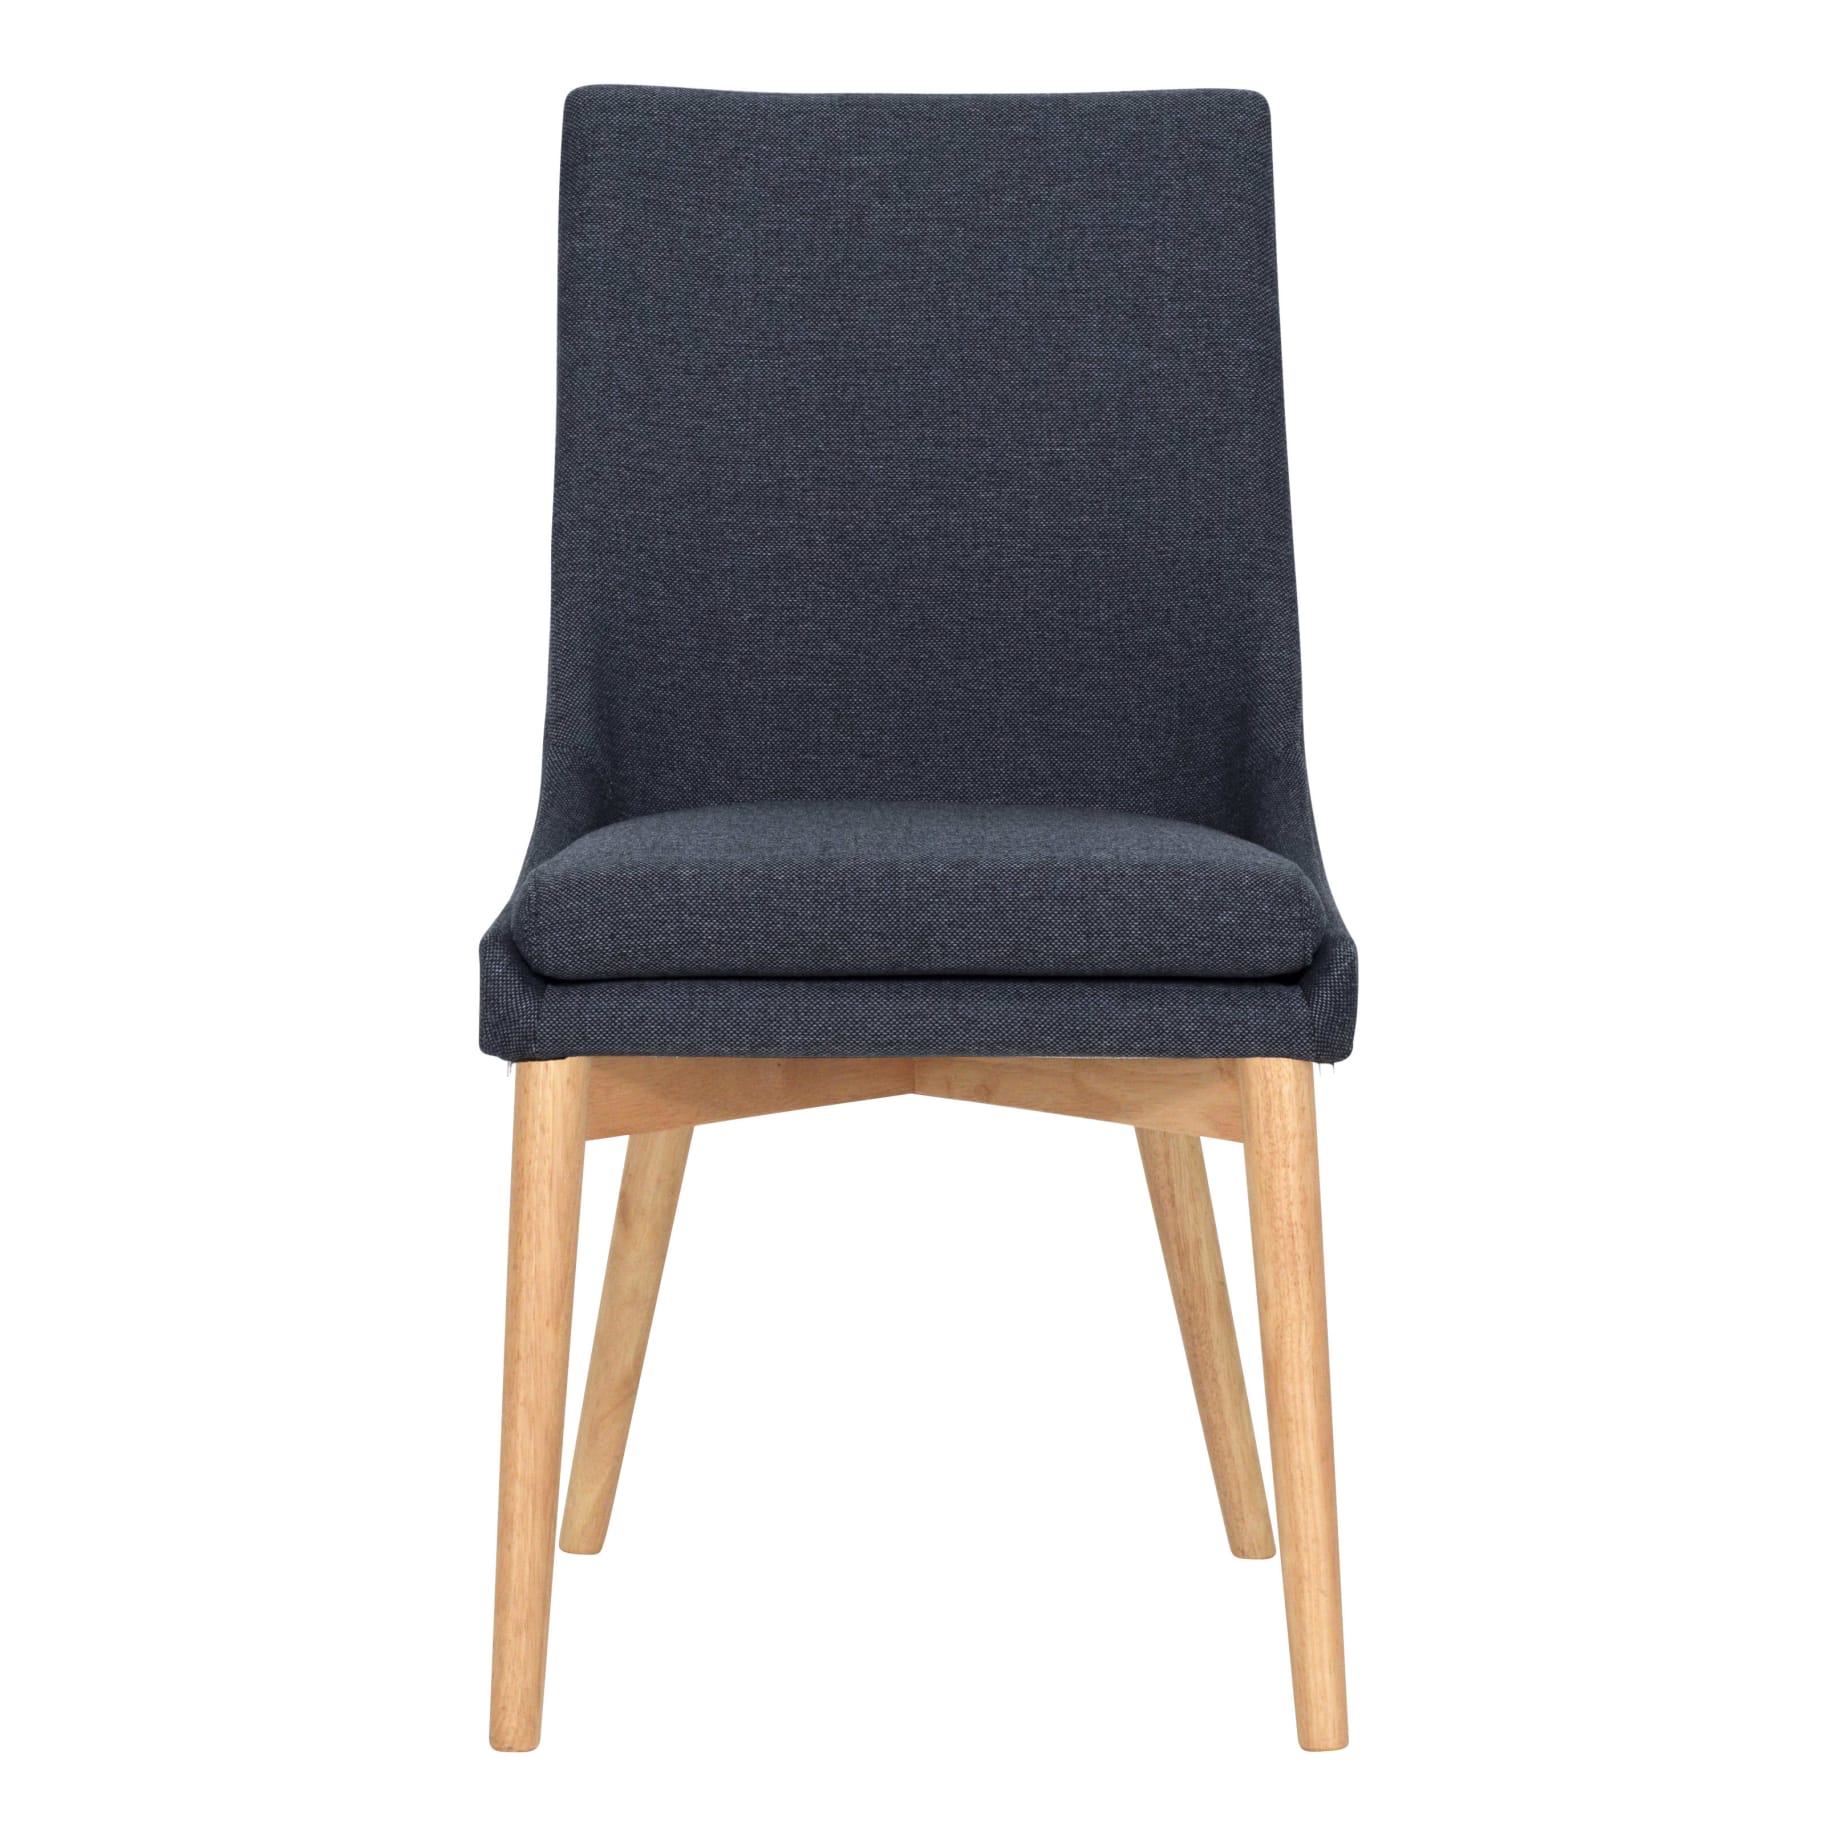 Highland Dining Chair in Grey Fabric / Oak Stain